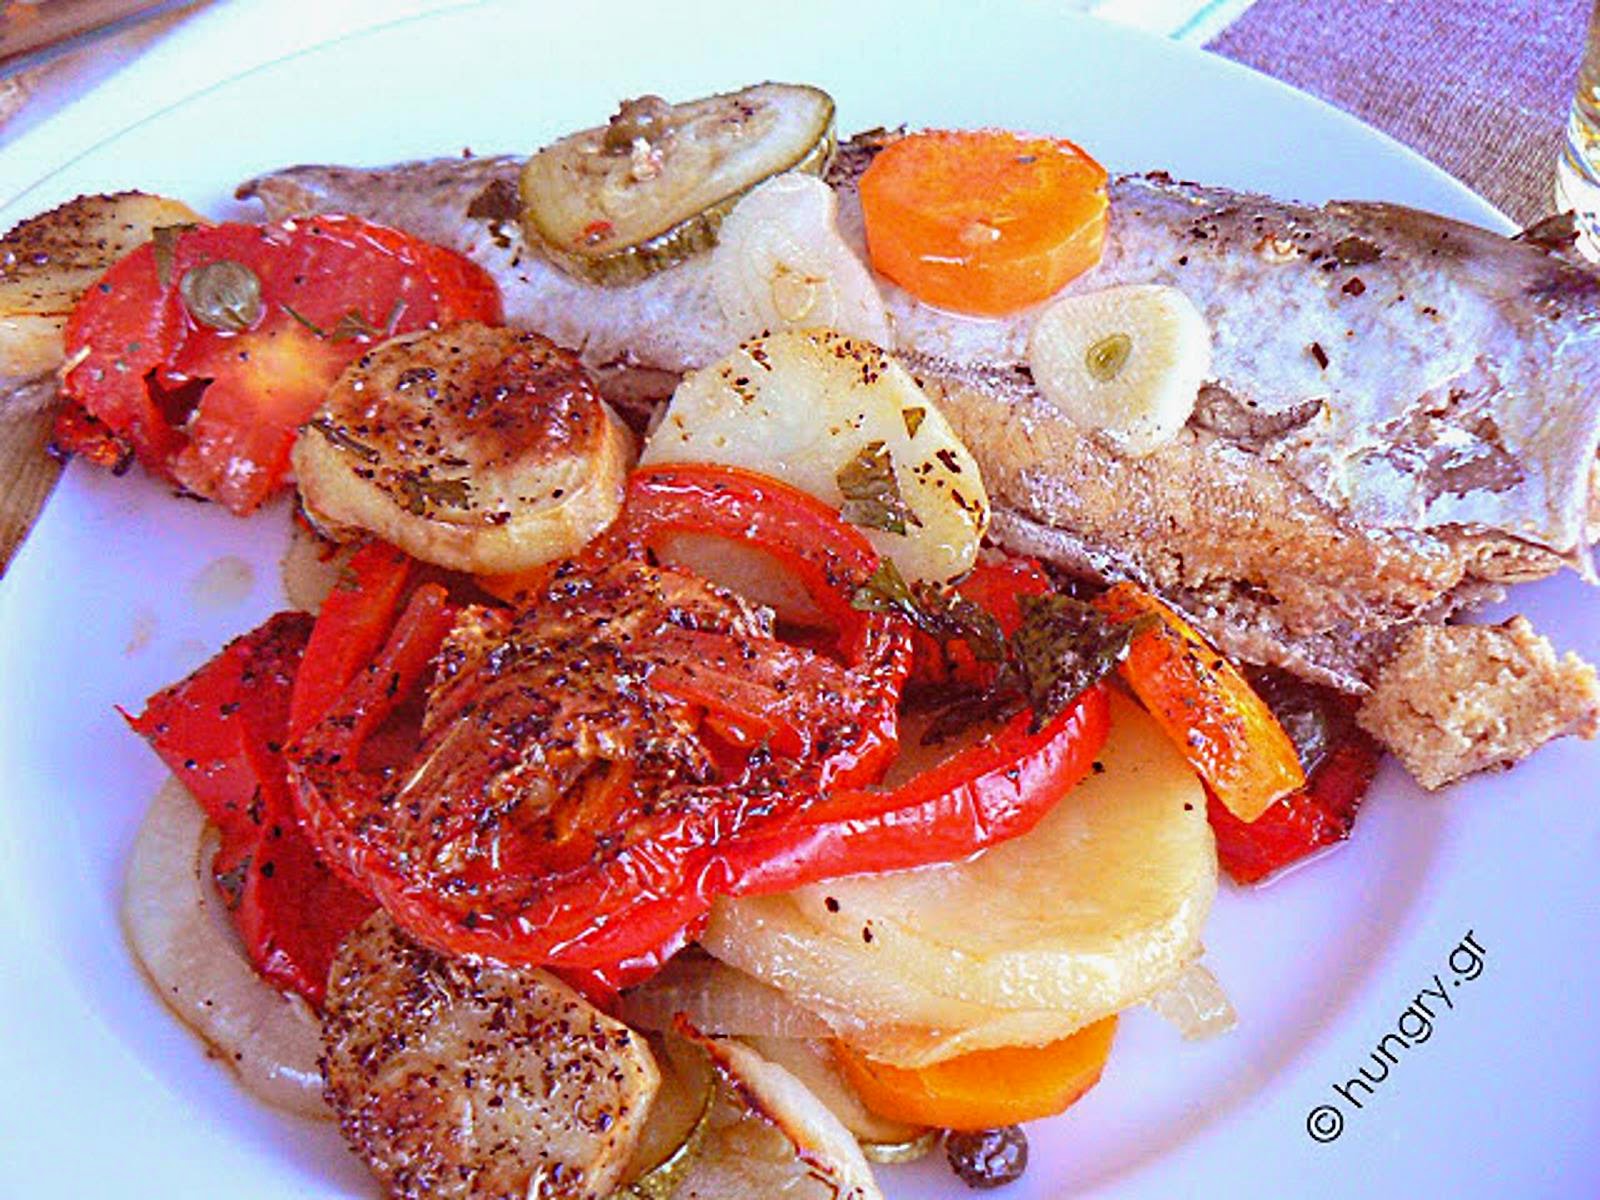 Oven Baked Mackerel with Vegetables